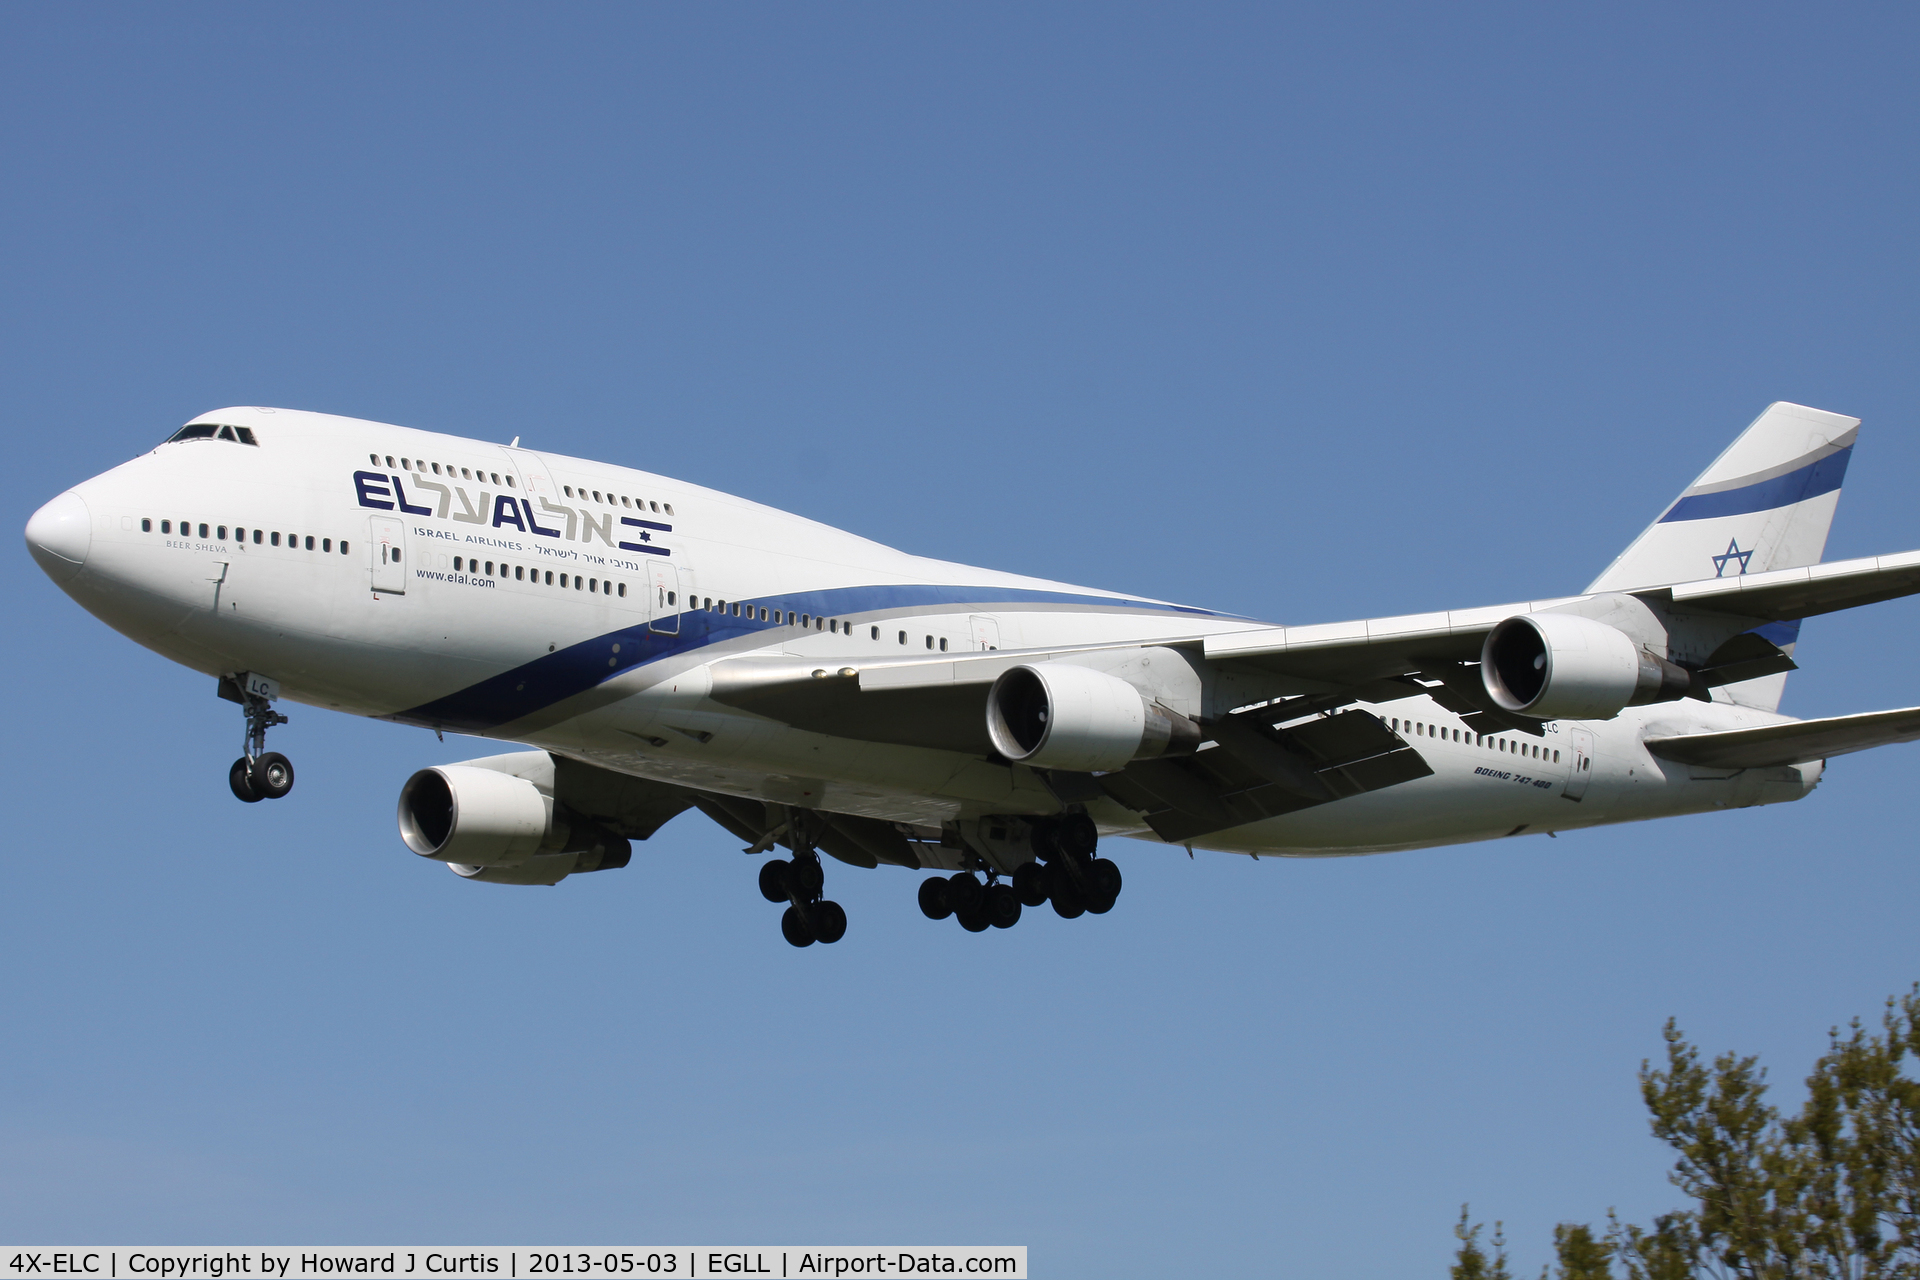 4X-ELC, 1995 Boeing 747-458 C/N 27915, Caught on approach to runway 27L.